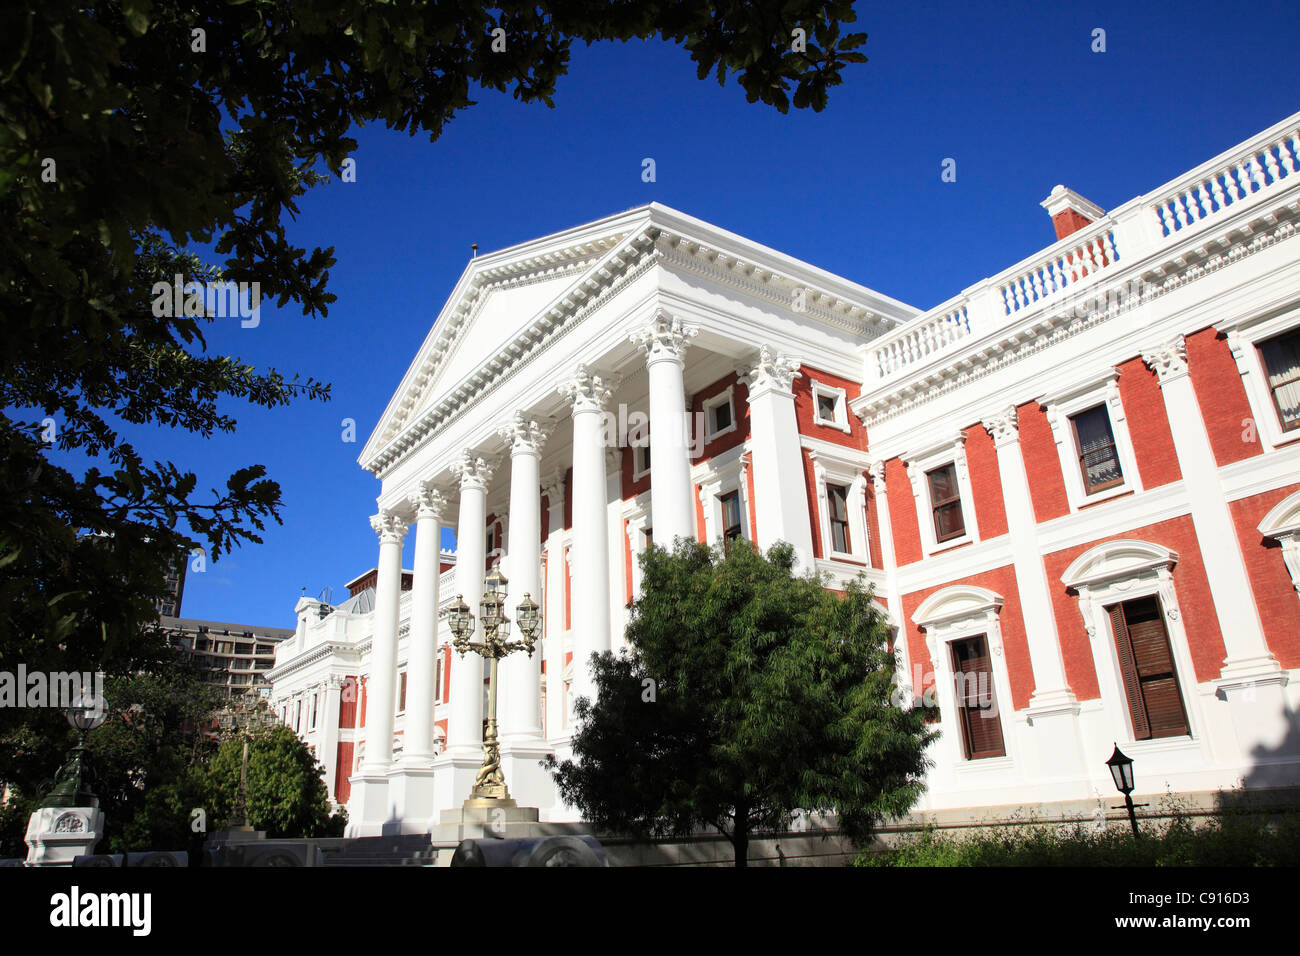 The Parliament building is a neo-classical building in white stone which dates from the 19th century. The Parliament building Stock Photo